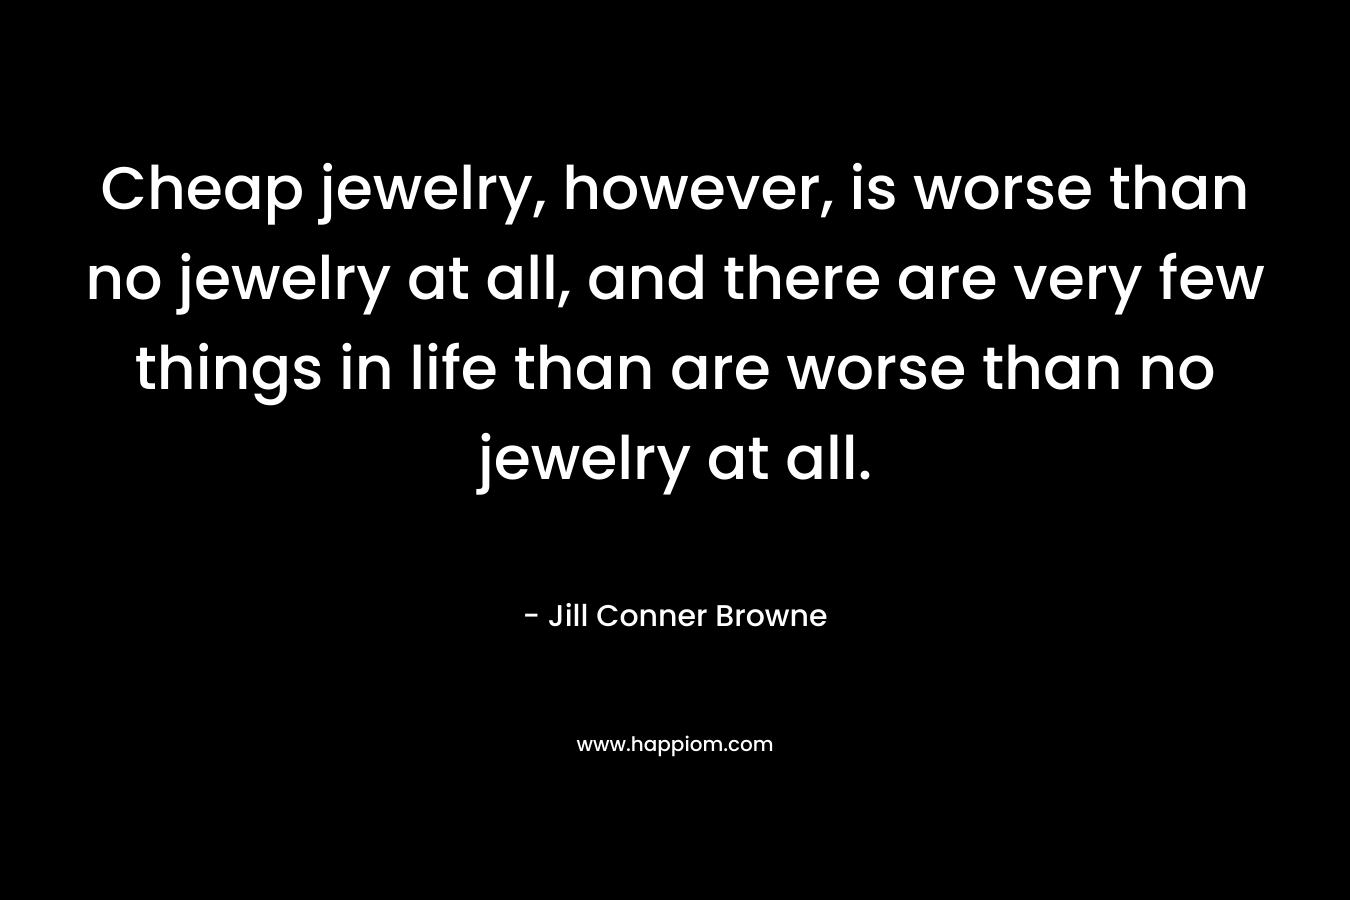 Cheap jewelry, however, is worse than no jewelry at all, and there are very few things in life than are worse than no jewelry at all. – Jill Conner Browne